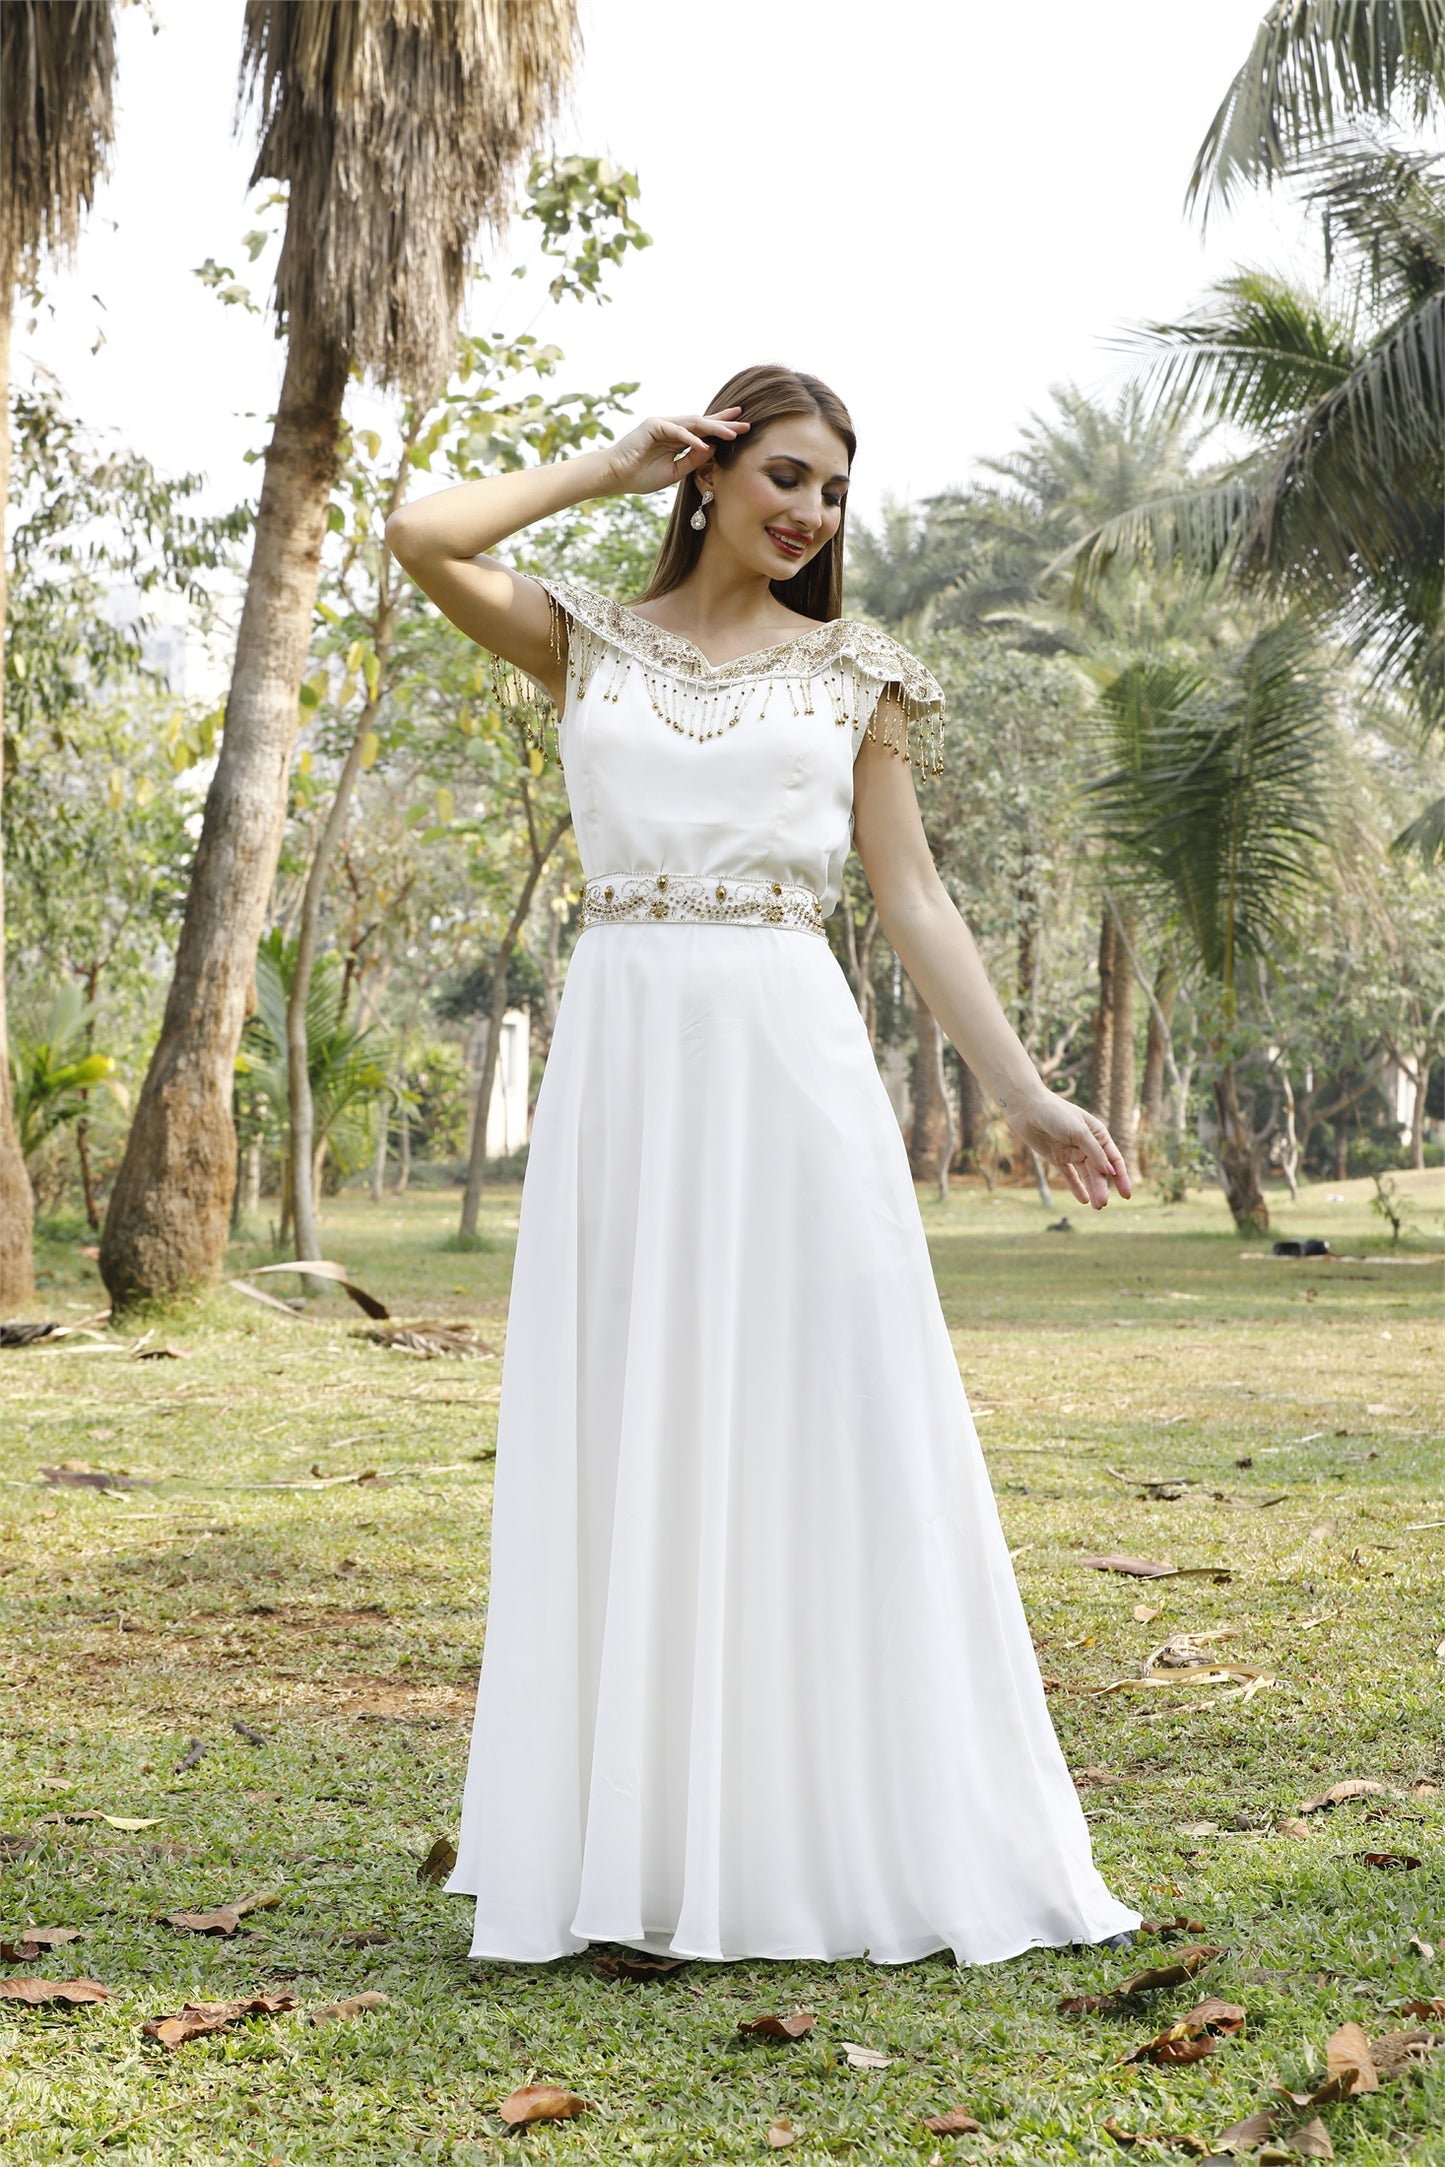 Cream Prom Gown Bridesmaid Dress with Golden Tassels